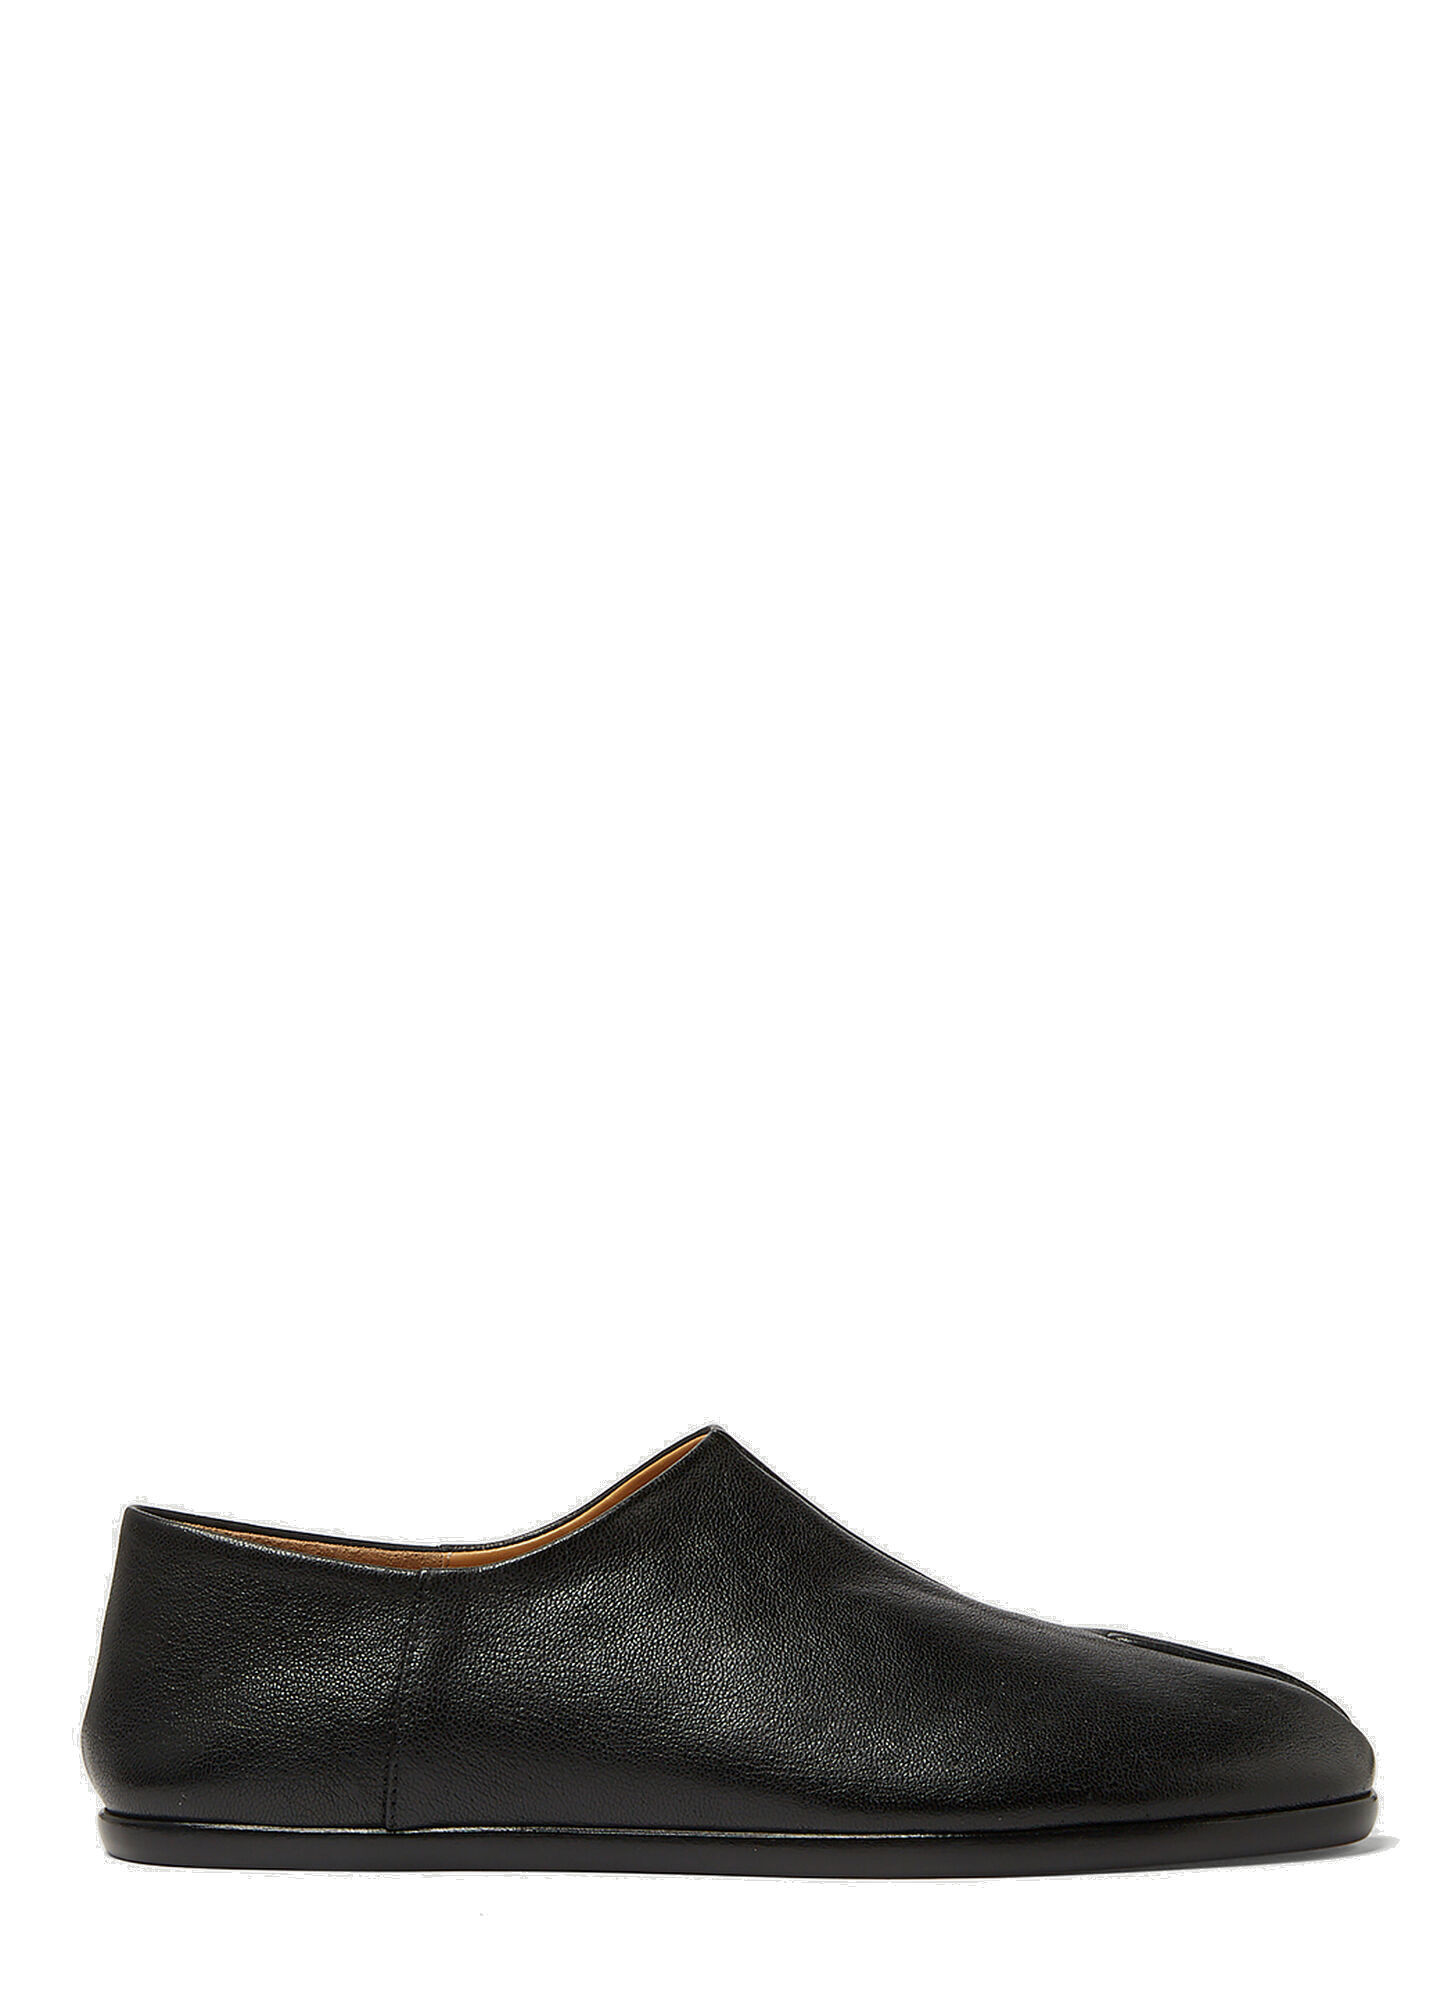 Photo: Tabi Babouche Loafers in Black